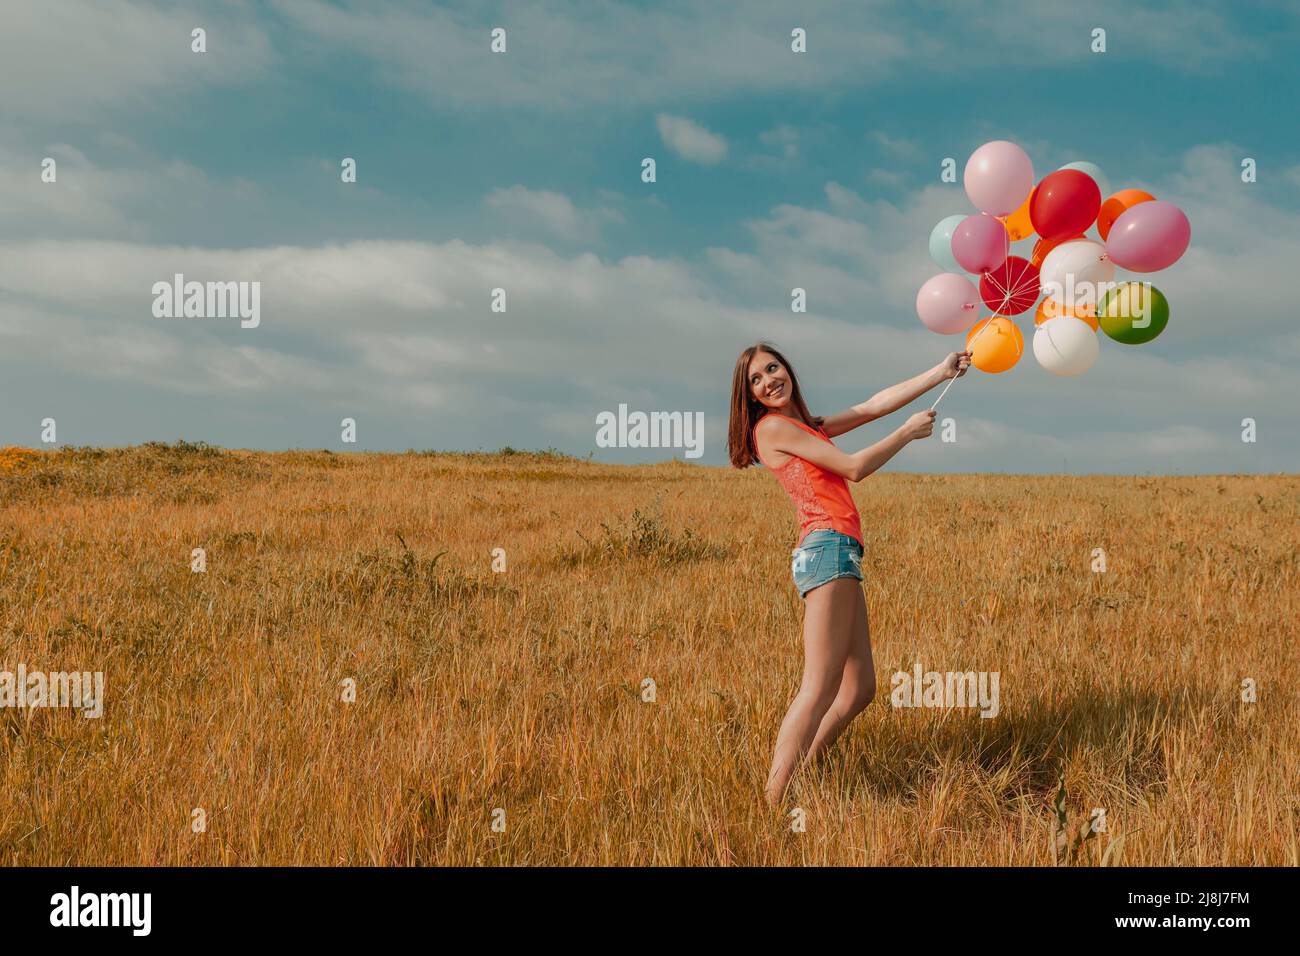 Young woman in the field holding colorful balloons Stock Photo